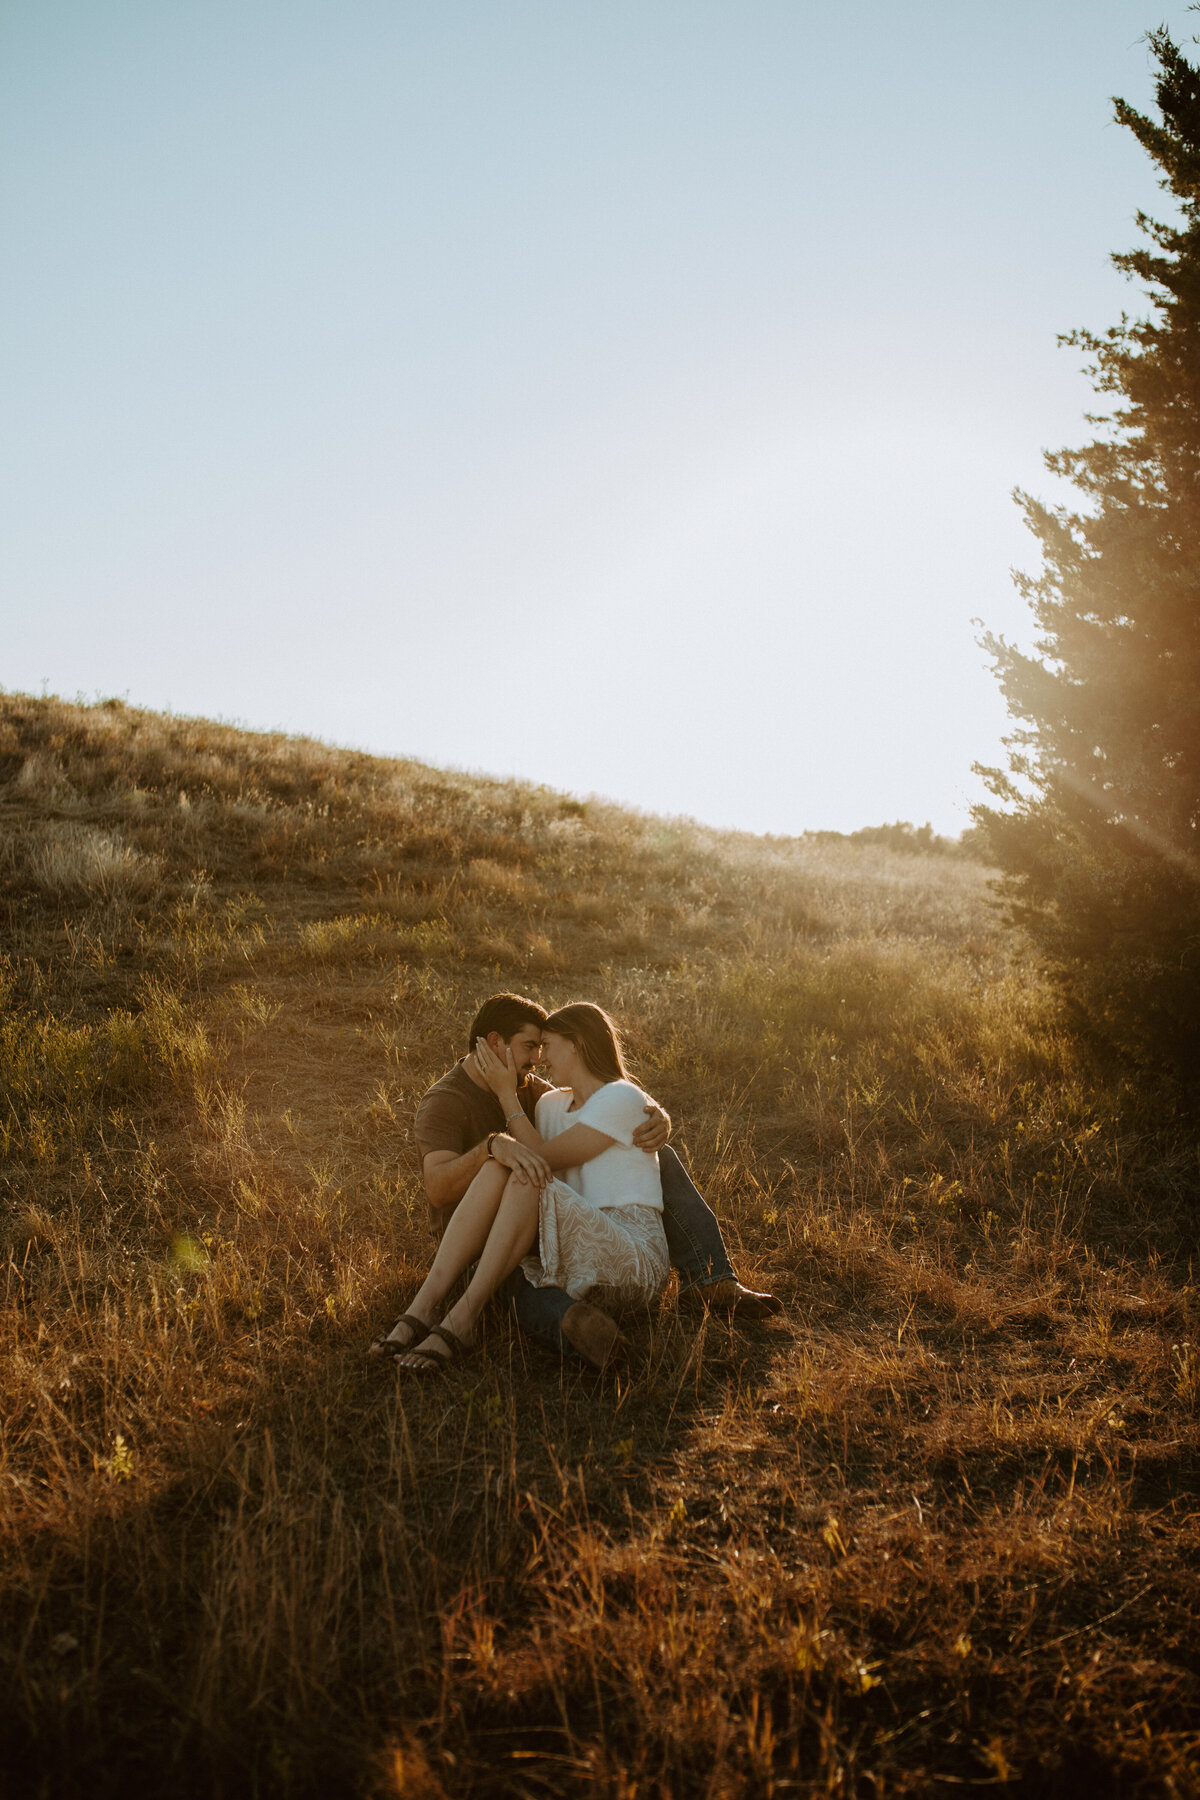 Man and woman sitting embracing each other with at golden hour